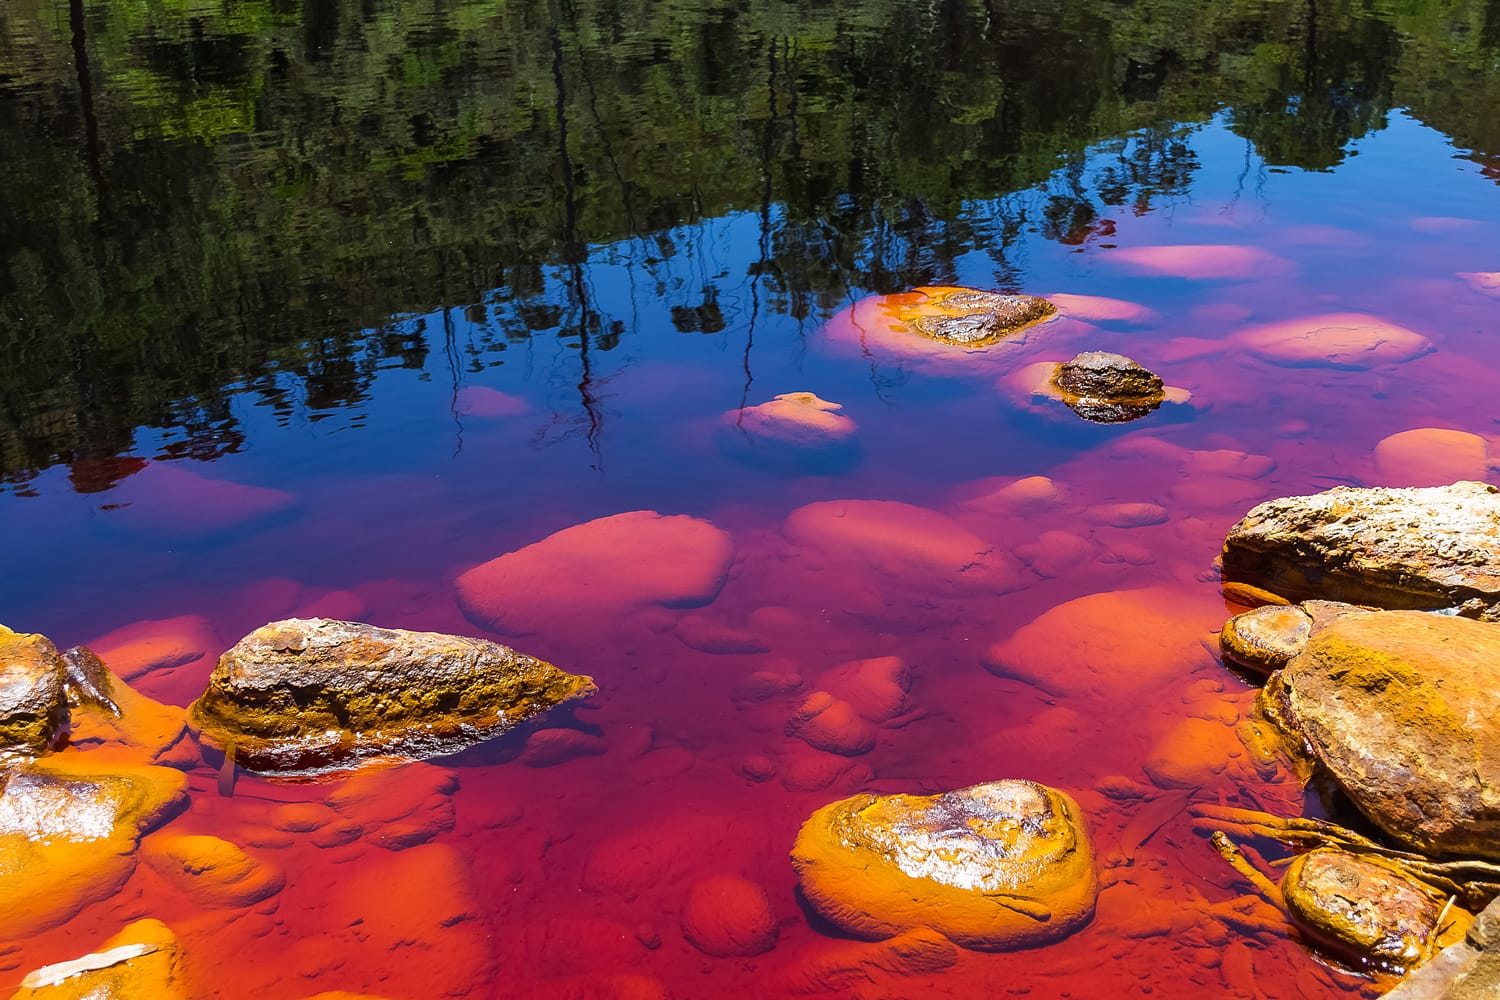 Stones in Rio Tinto river. The rocks can make infinite number of abstract compositions. Red tinted river by copper on the ground. Water used in life study for life detection in Mars